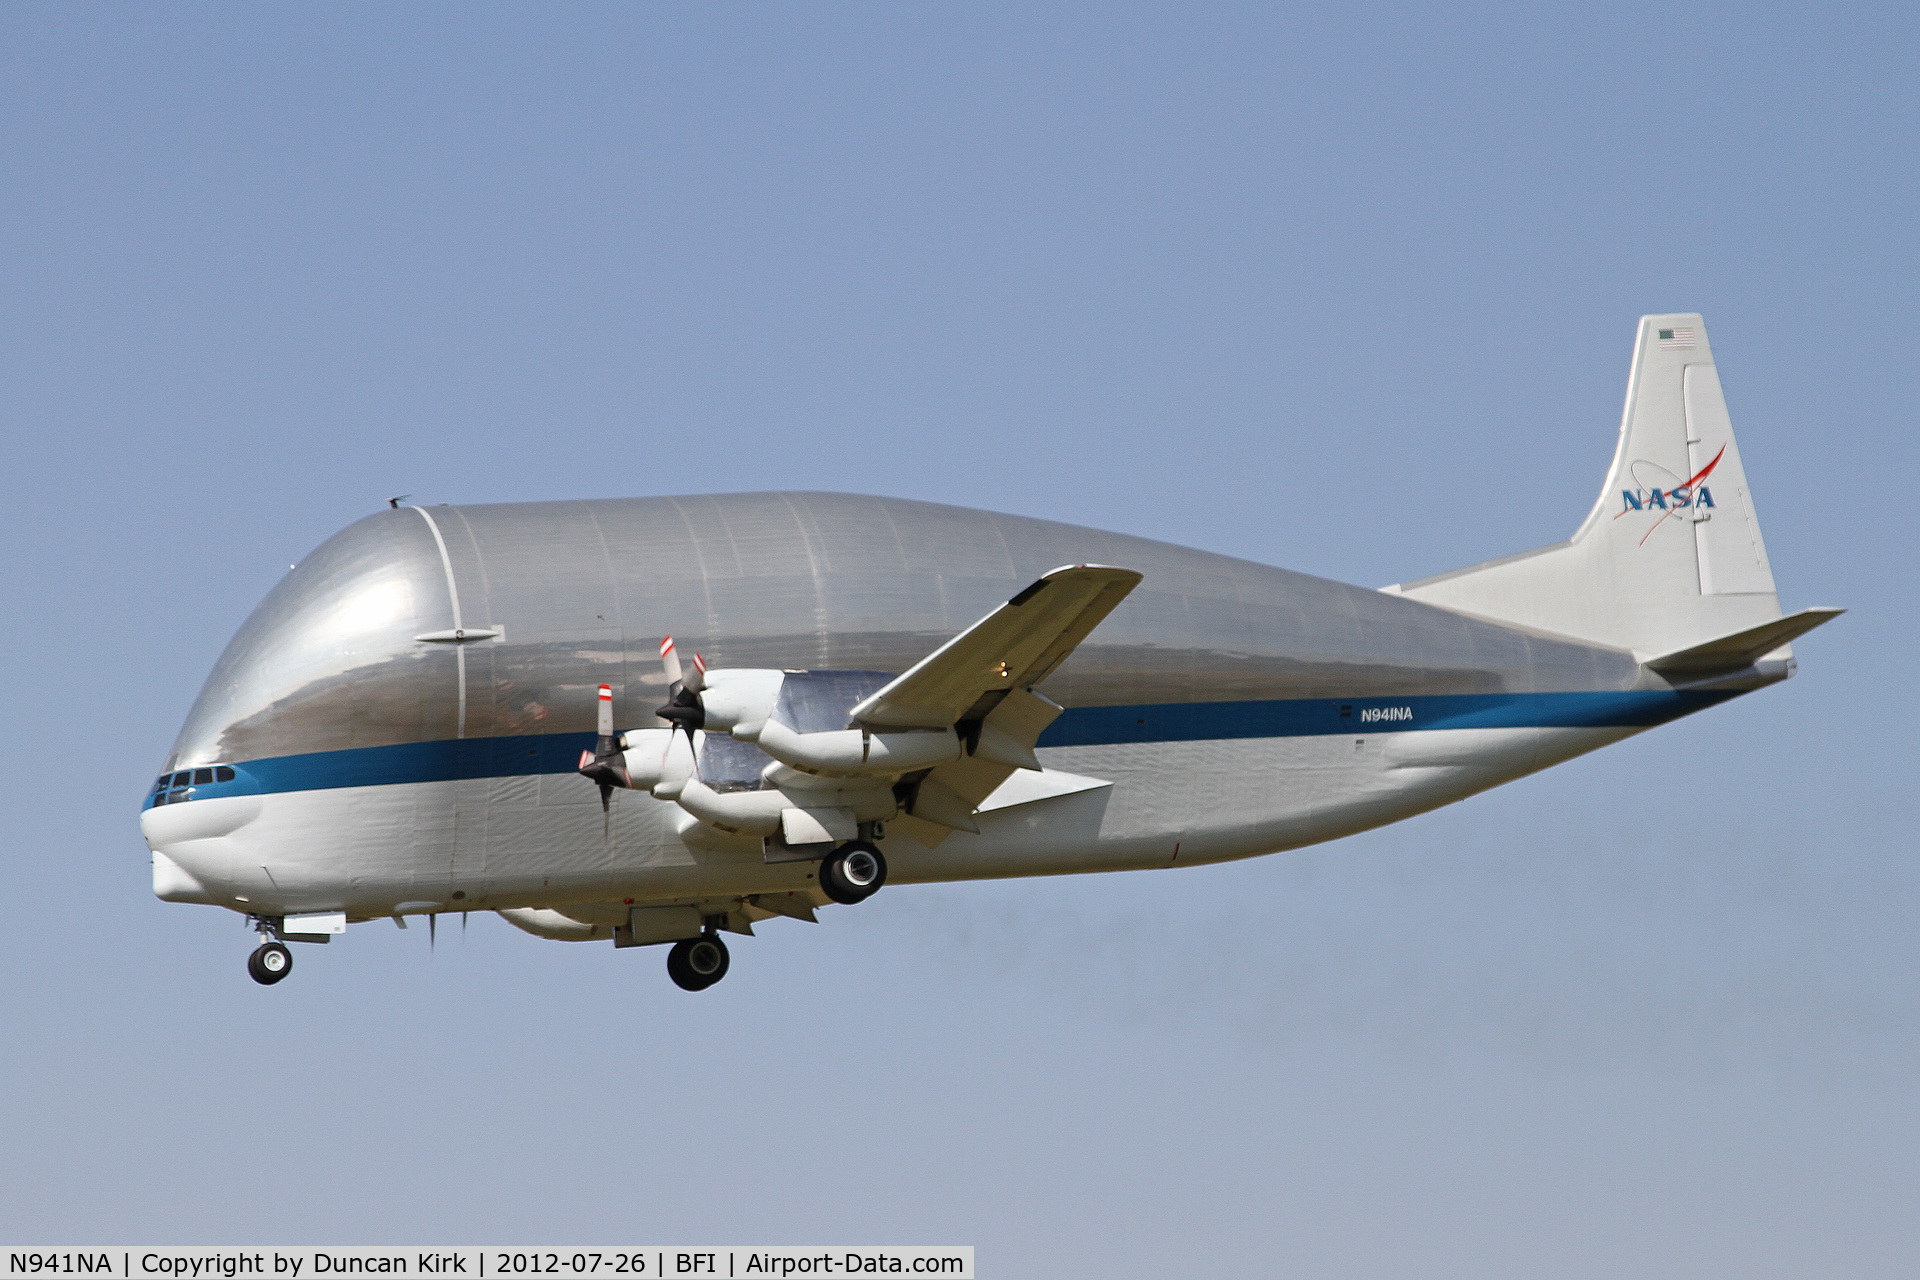 N941NA, Aero Spacelines 377SGT-F Super Guppy Turbine C/N 0004, On finals with the second shipment of the space shuttle mock up.